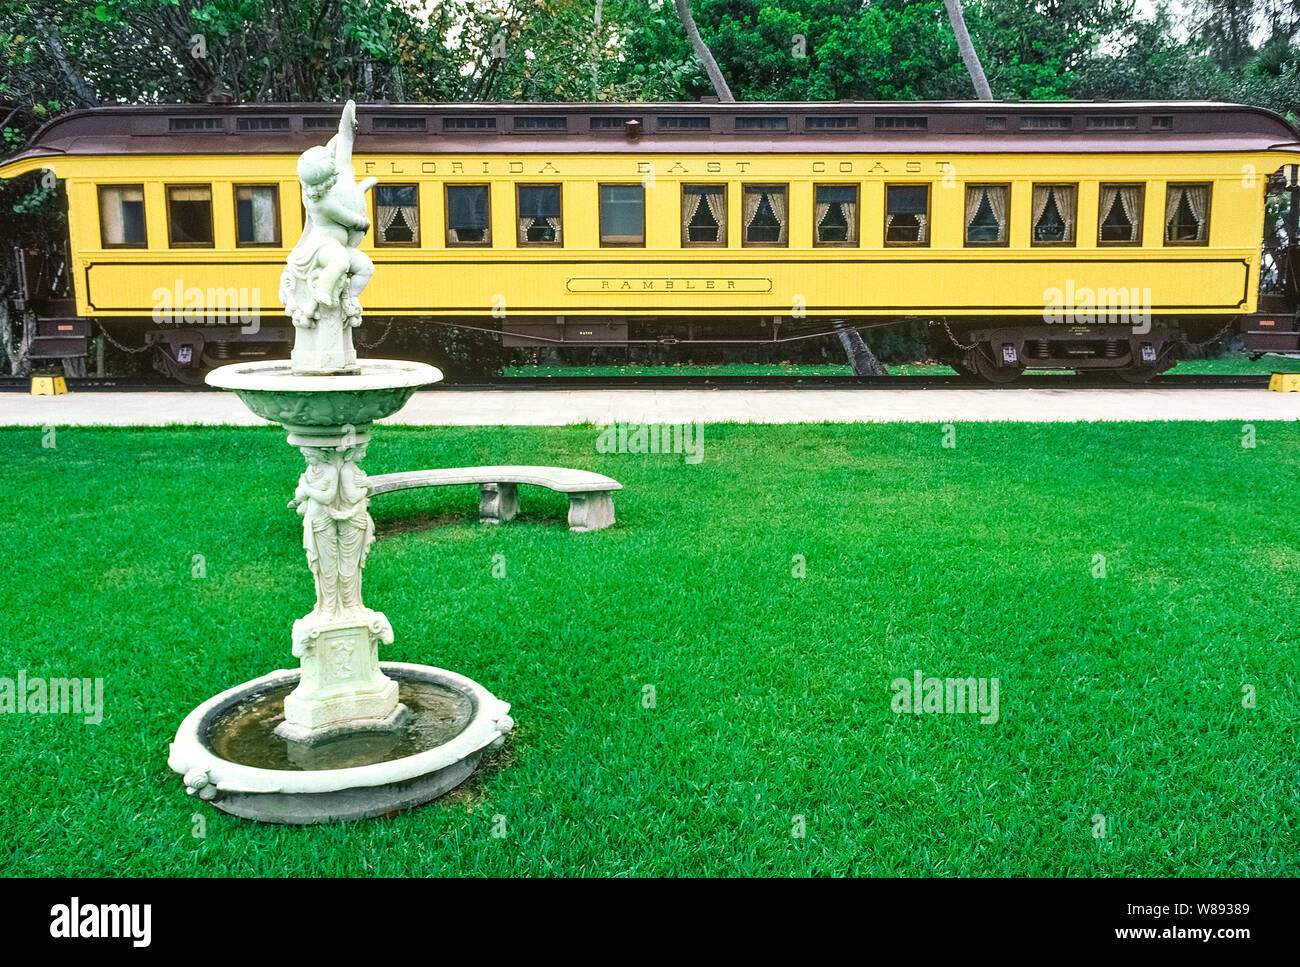 The private 1886 railcar used for business by the owner of the Florida East Coast Railway, Henry M. Flagler, sits outside his opulent mansion, Whitehall, that is now the Flagler Museum in Palm Beach, Florida, USA. Called 'a palace on wheels,' the Victorian-styled train car features a wood-paneled office, kitchen, Flagler's private stateroom with bath, and sleeping berths for visitors. Officially named Railcar No. 91, the 'Rambler' was repainted dark green and moved under cover of a new pavilion at the museum in 2004. Stock Photo